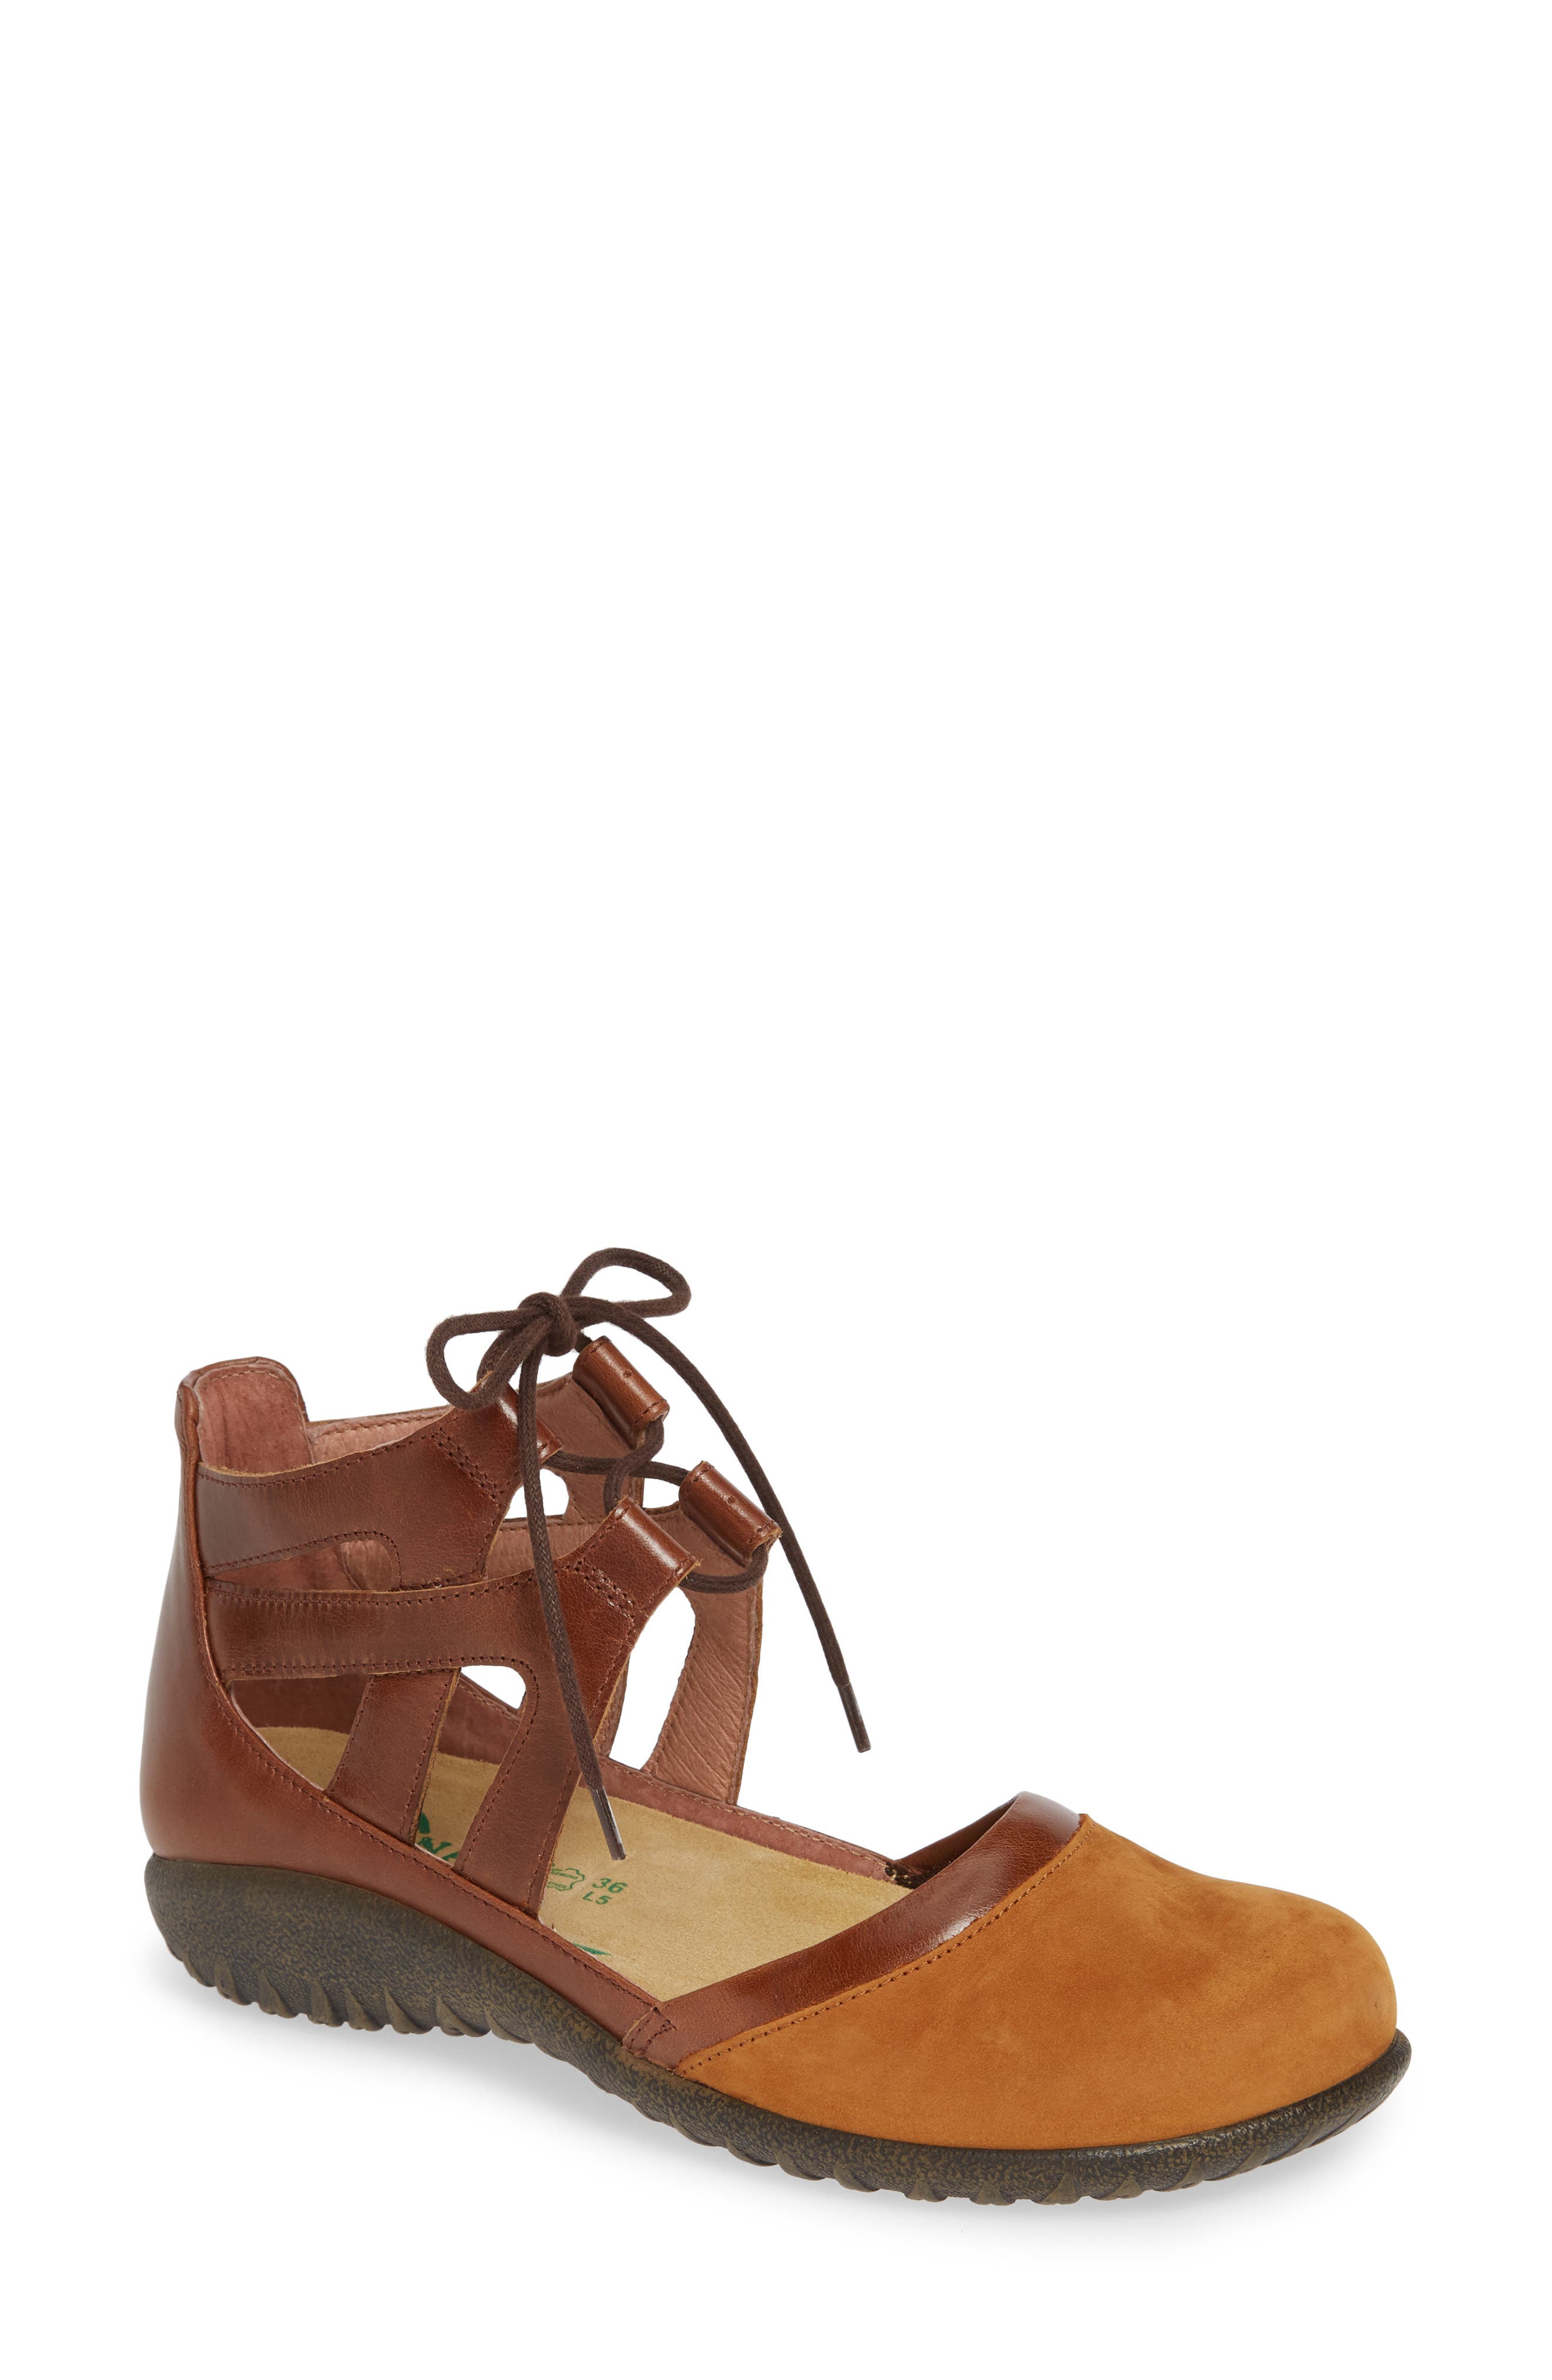 Women's Naot Shoes | Nordstrom